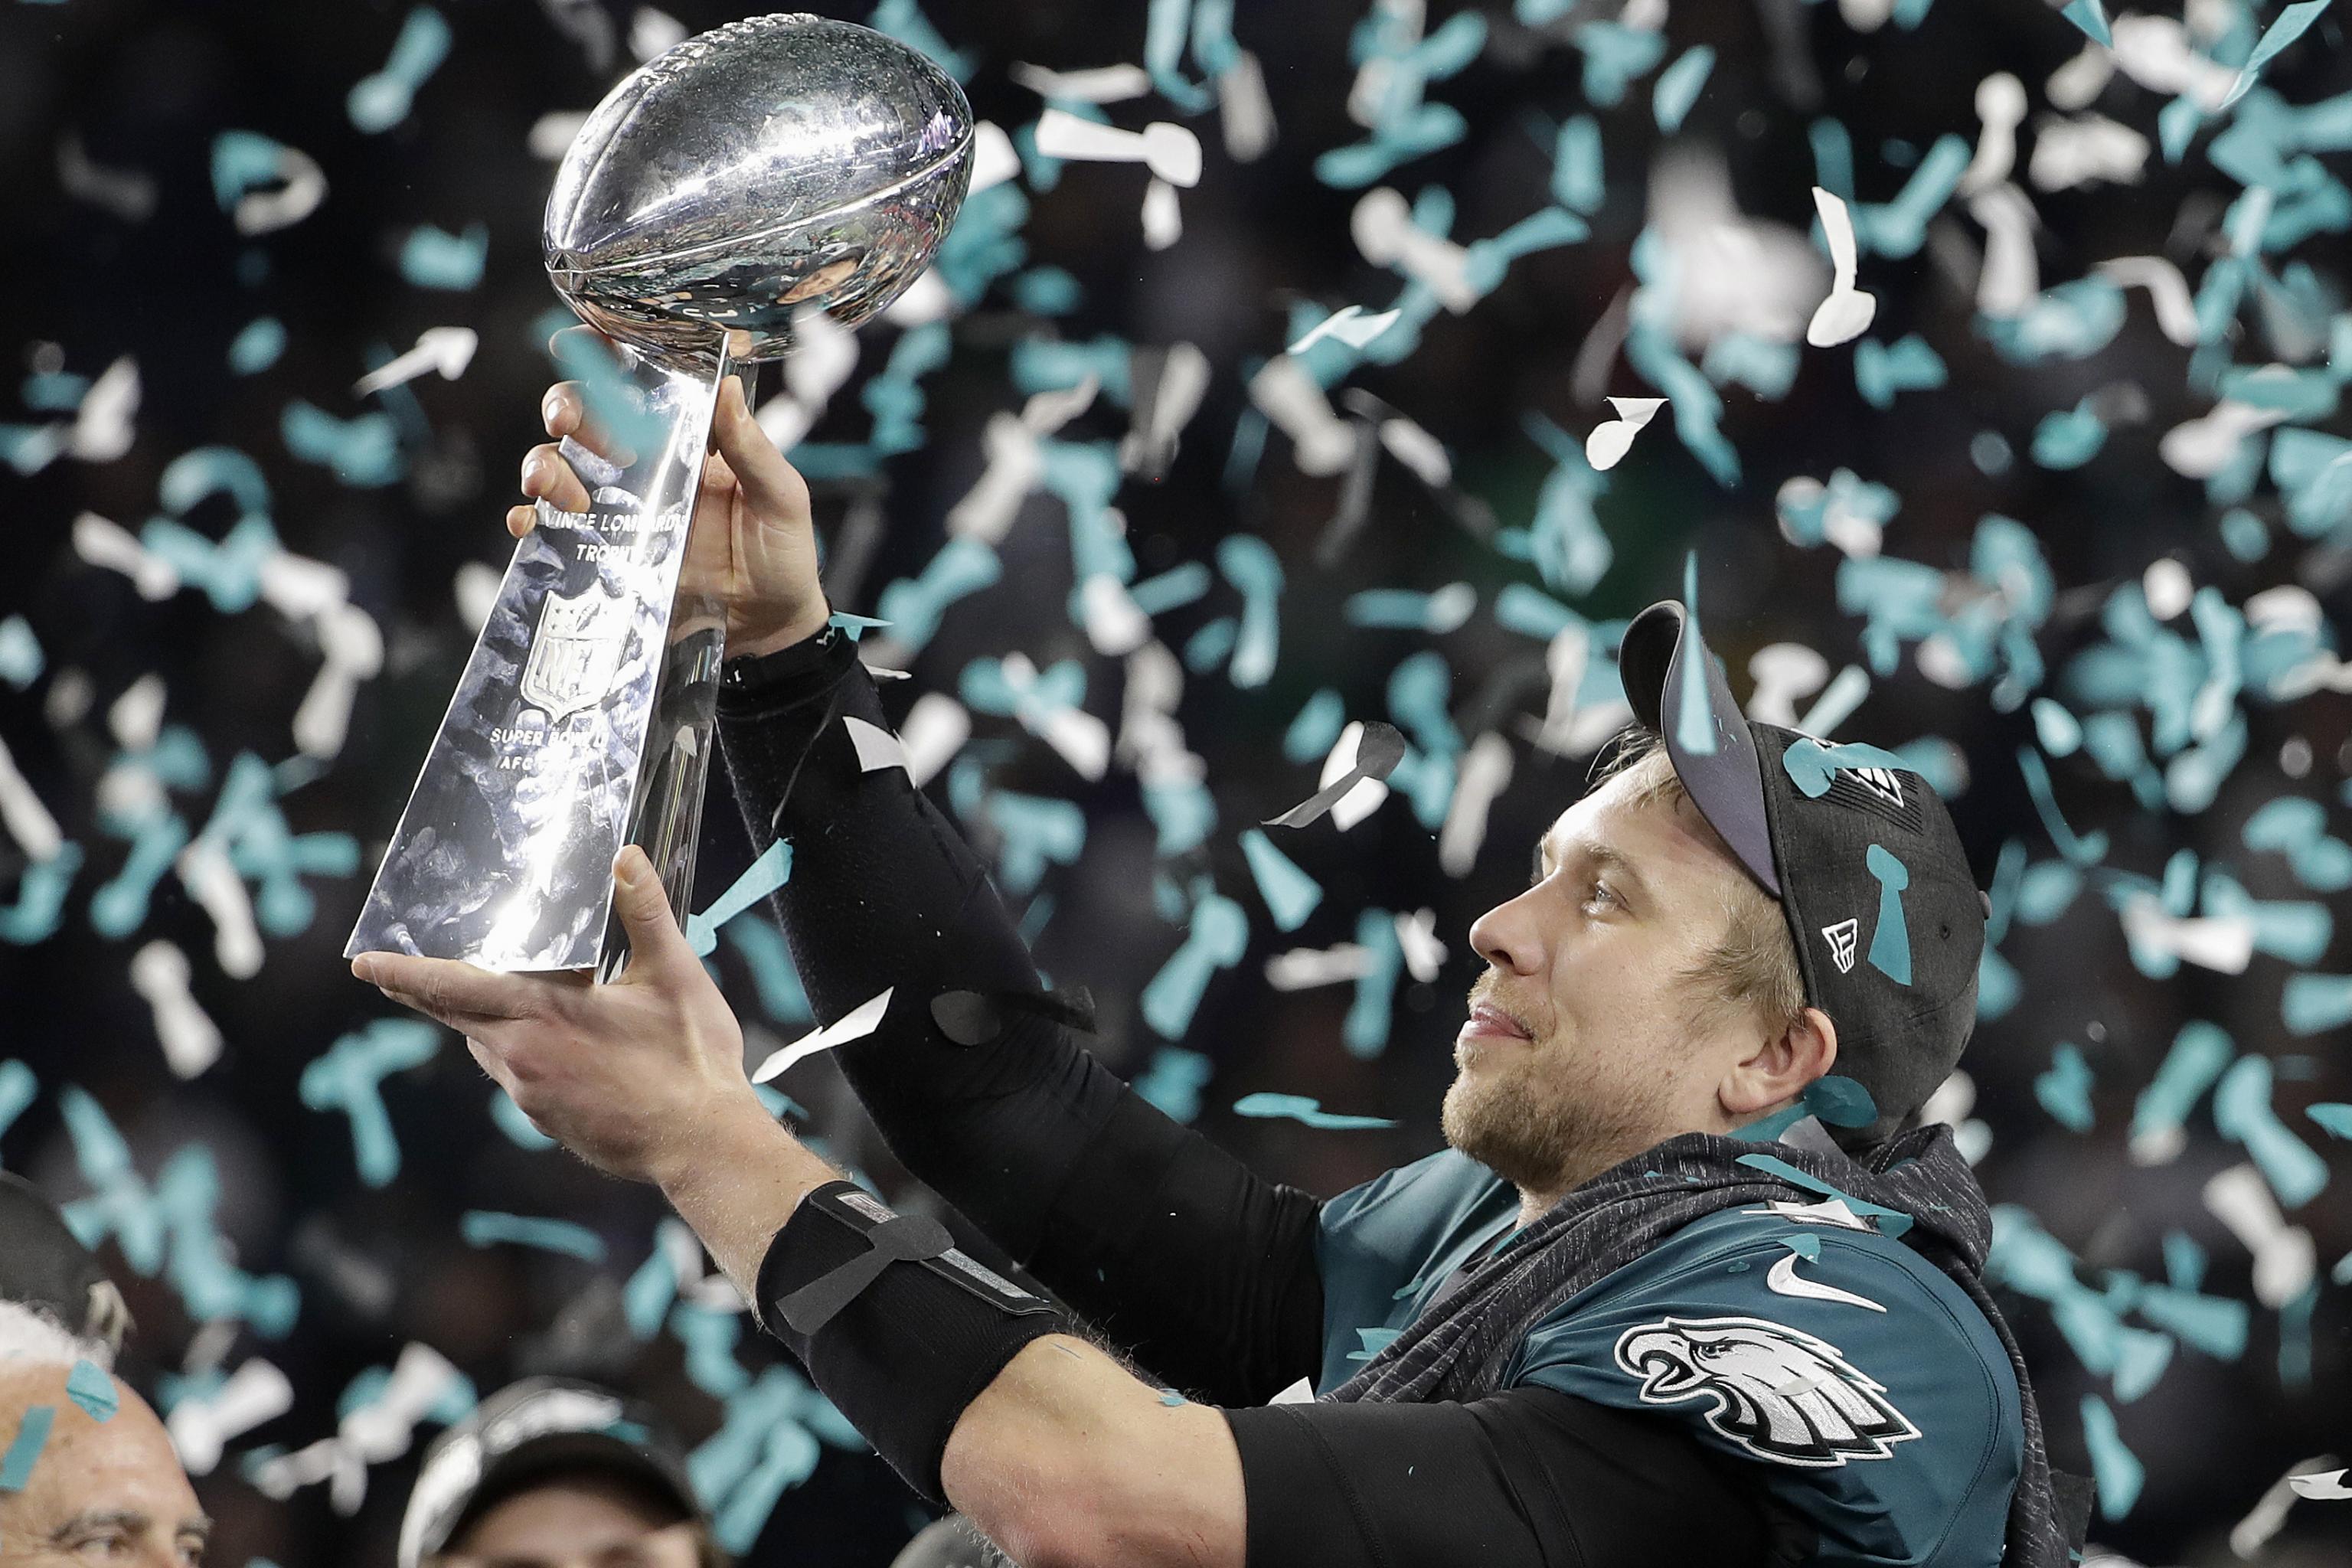 Eagles Super Bowl 52 Rings Include Tribute to 'Philly Special